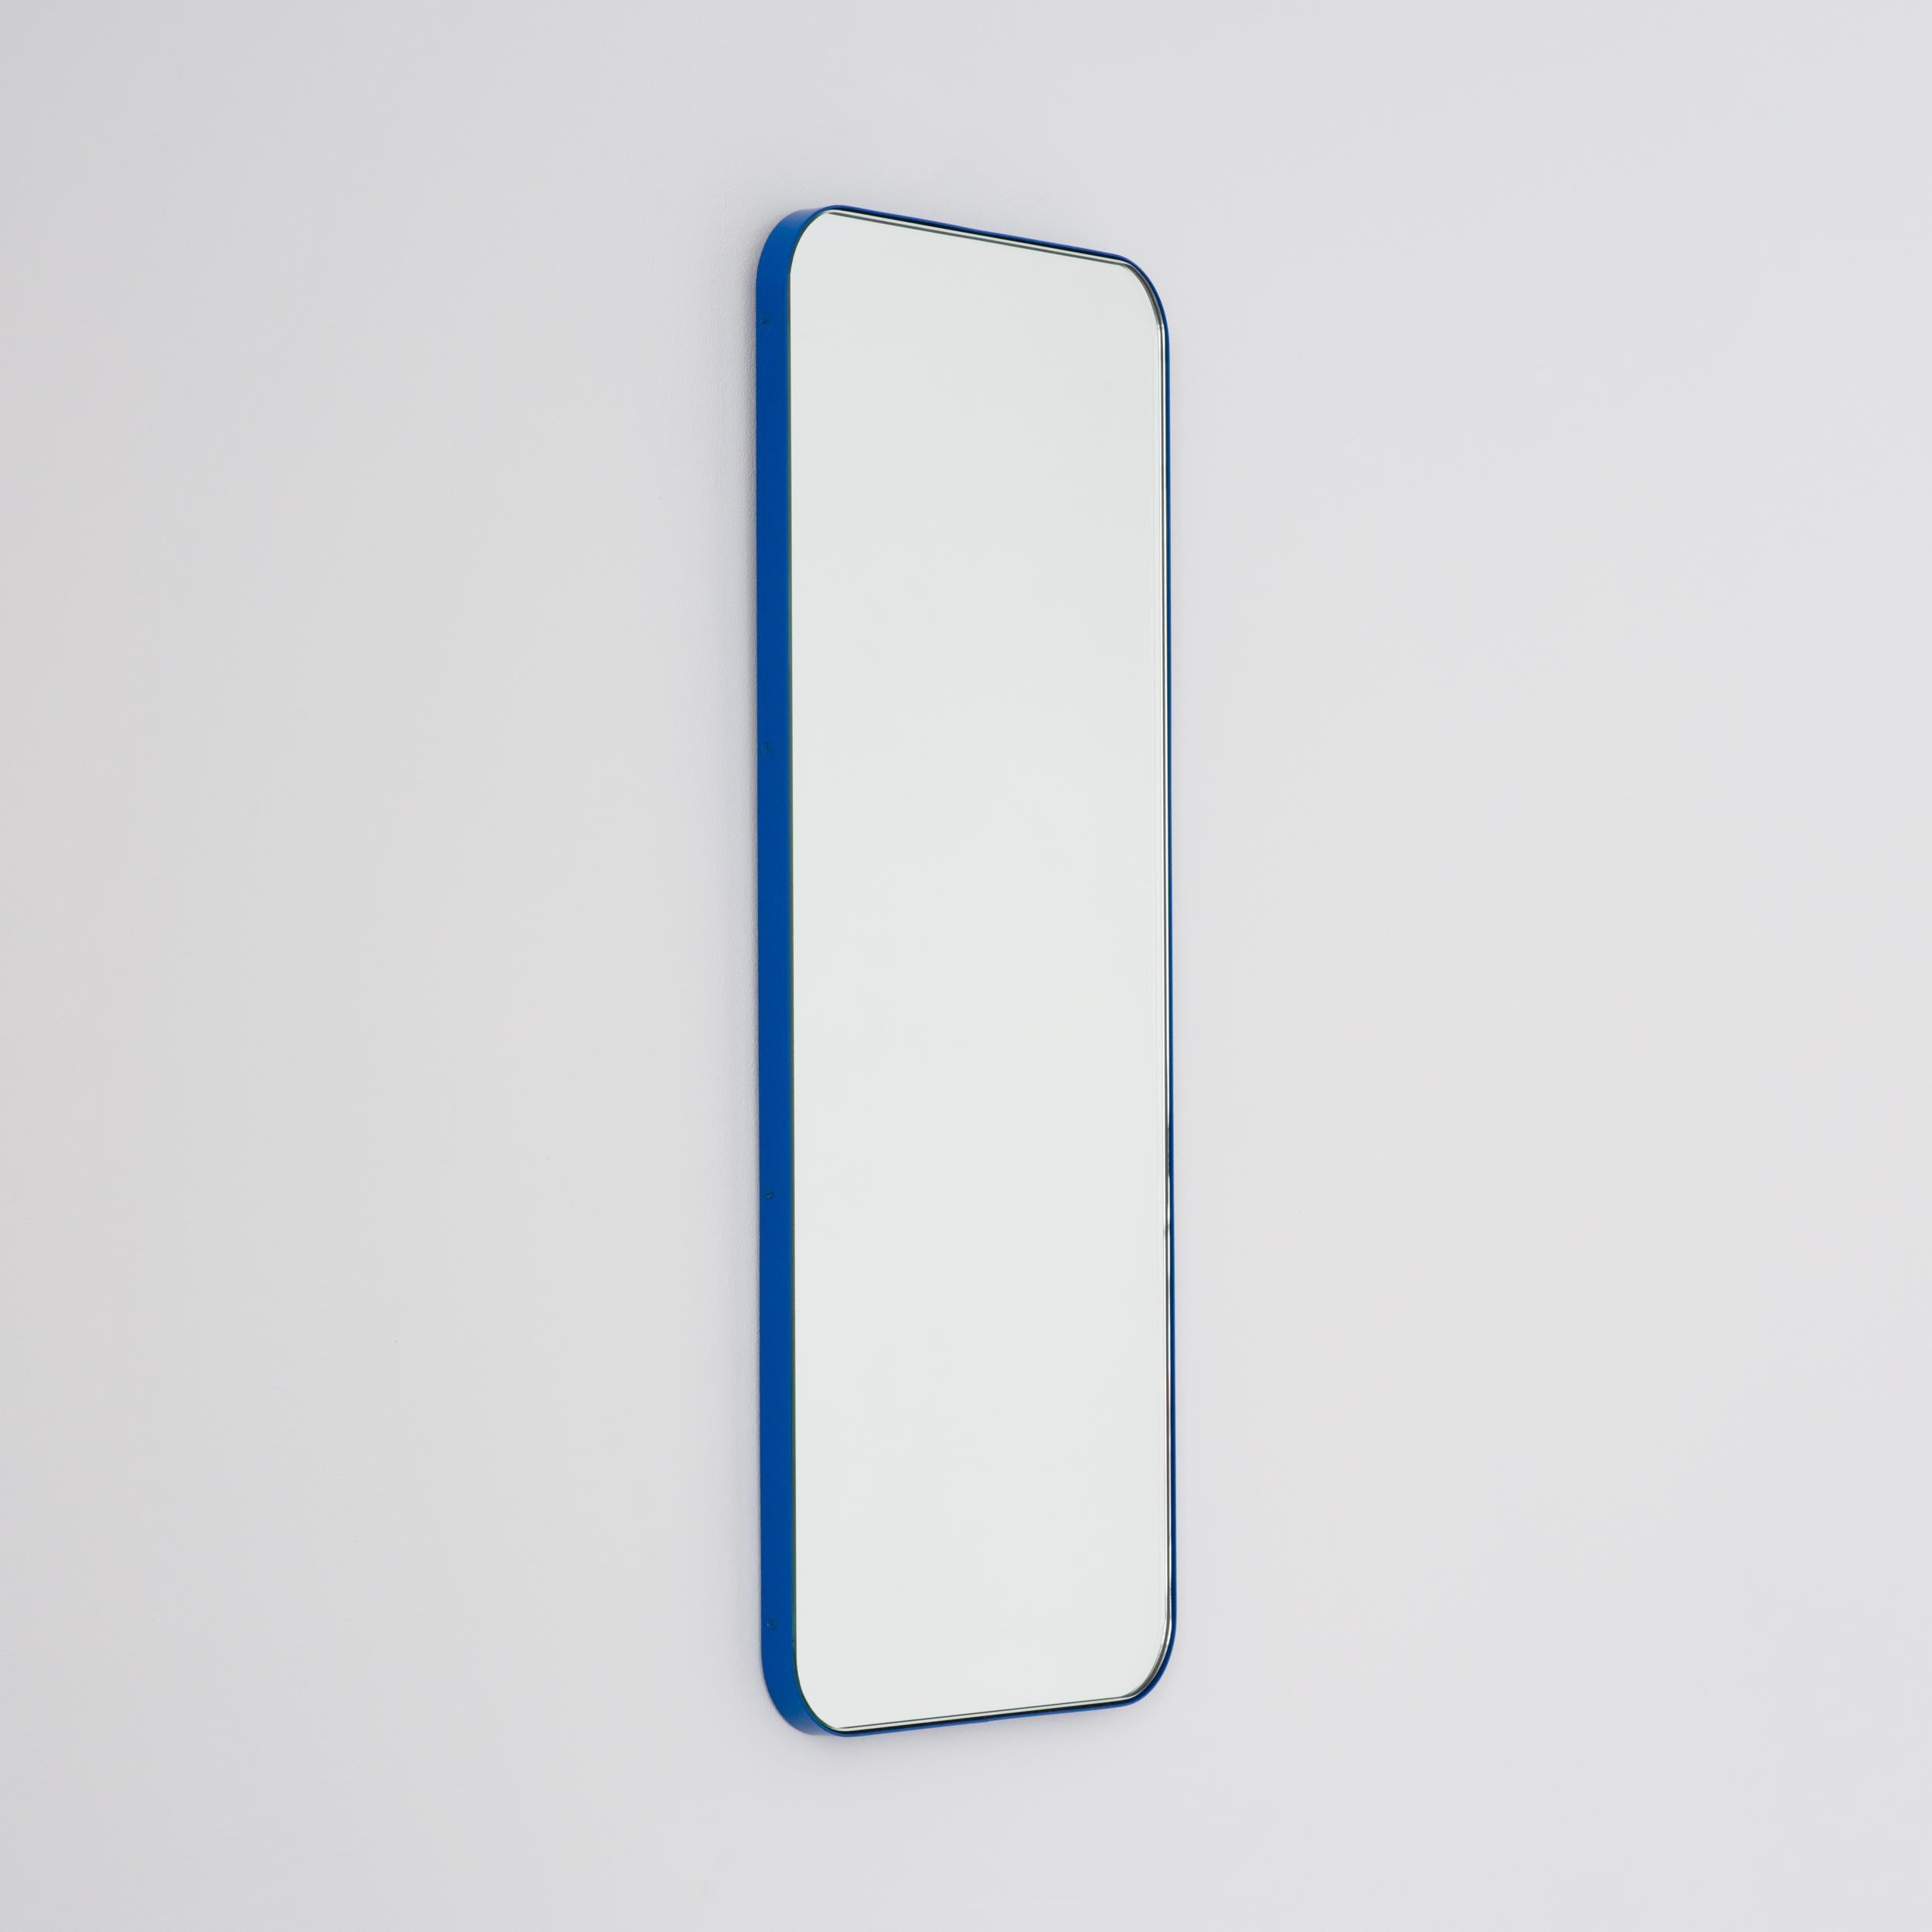 Modern rectangular mirror with a minimalist blue frame. Part of the charming Quadris collection, designed and handcrafted in London, UK. 

Our mirrors are designed with an integrated French cleat (split batten) system that ensures the mirror is